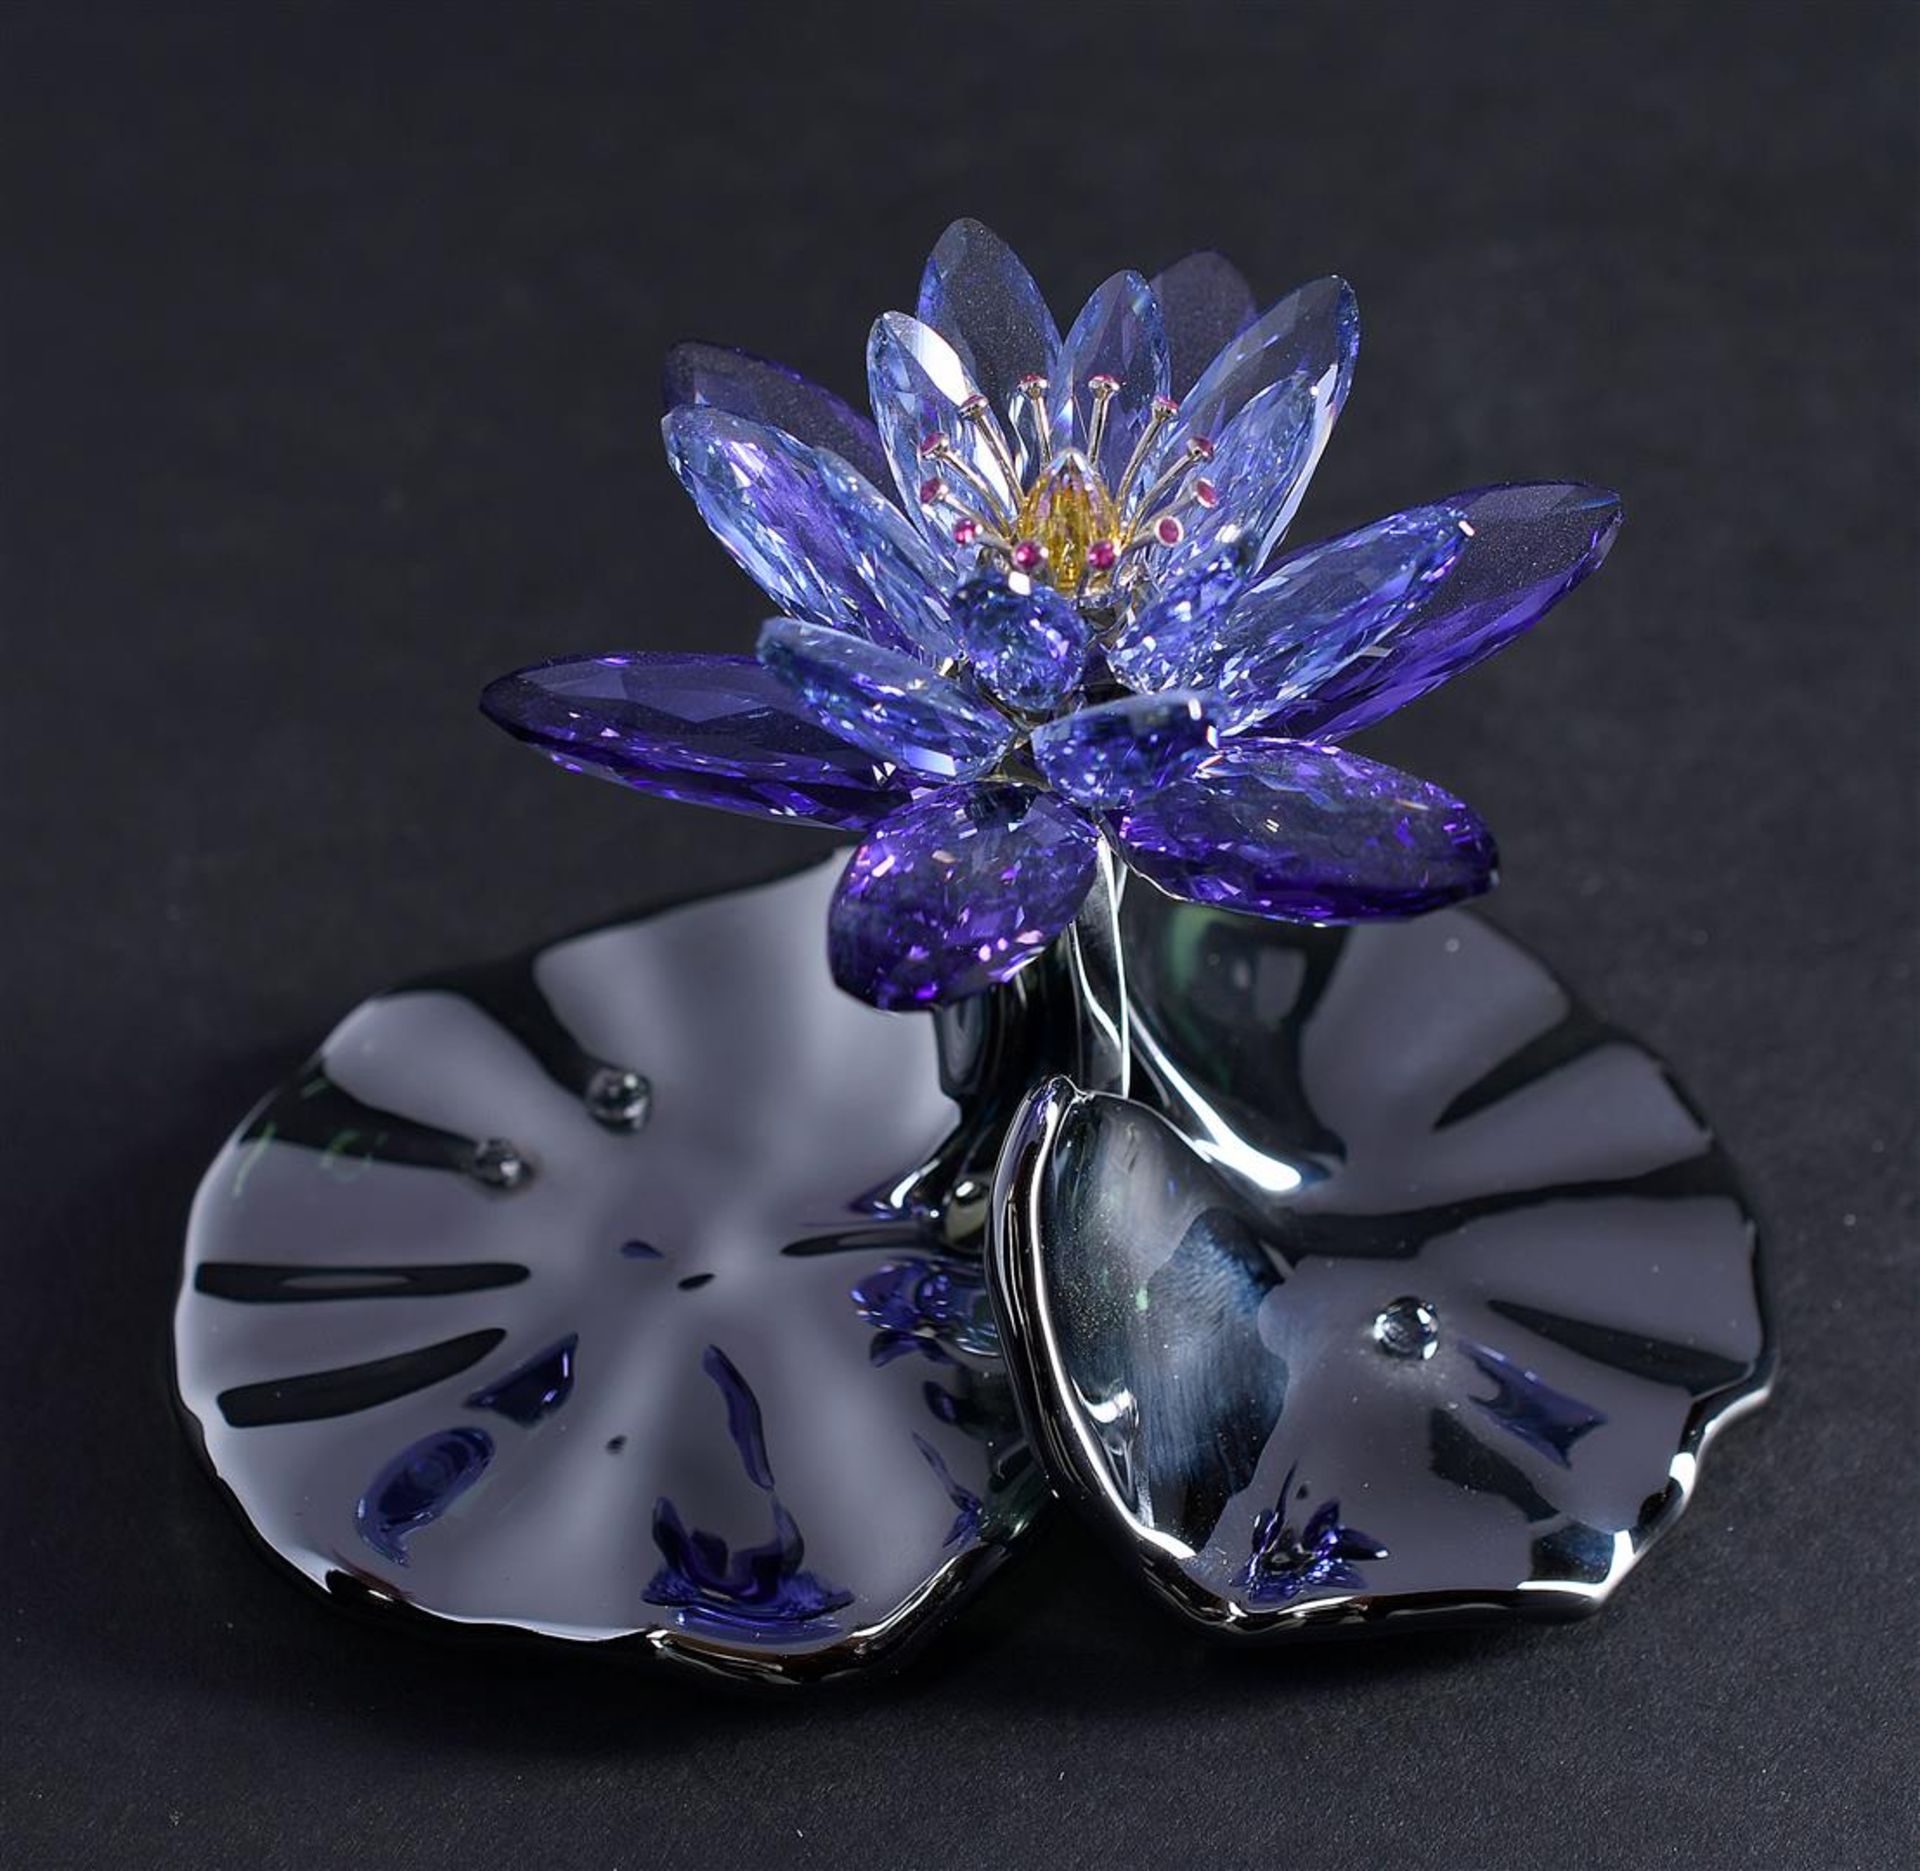 Swarovski, Water Lily - Blue Violet, Year of issue 2012, 1141630. Includes original box.
7.3 x 10.8 